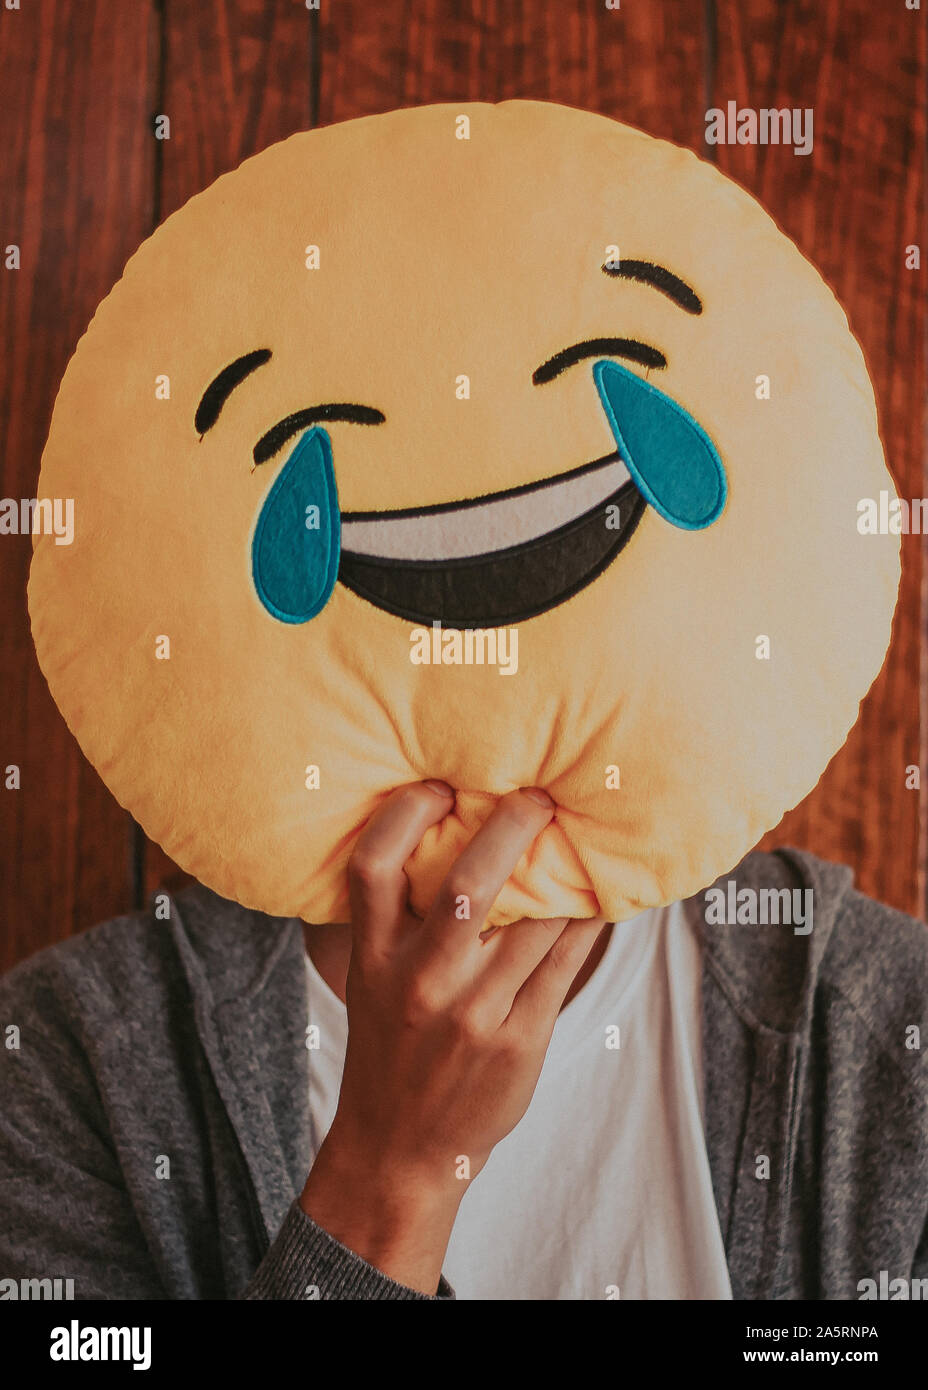 Laughter emoticon used as a mask to cover your face Stock Photo